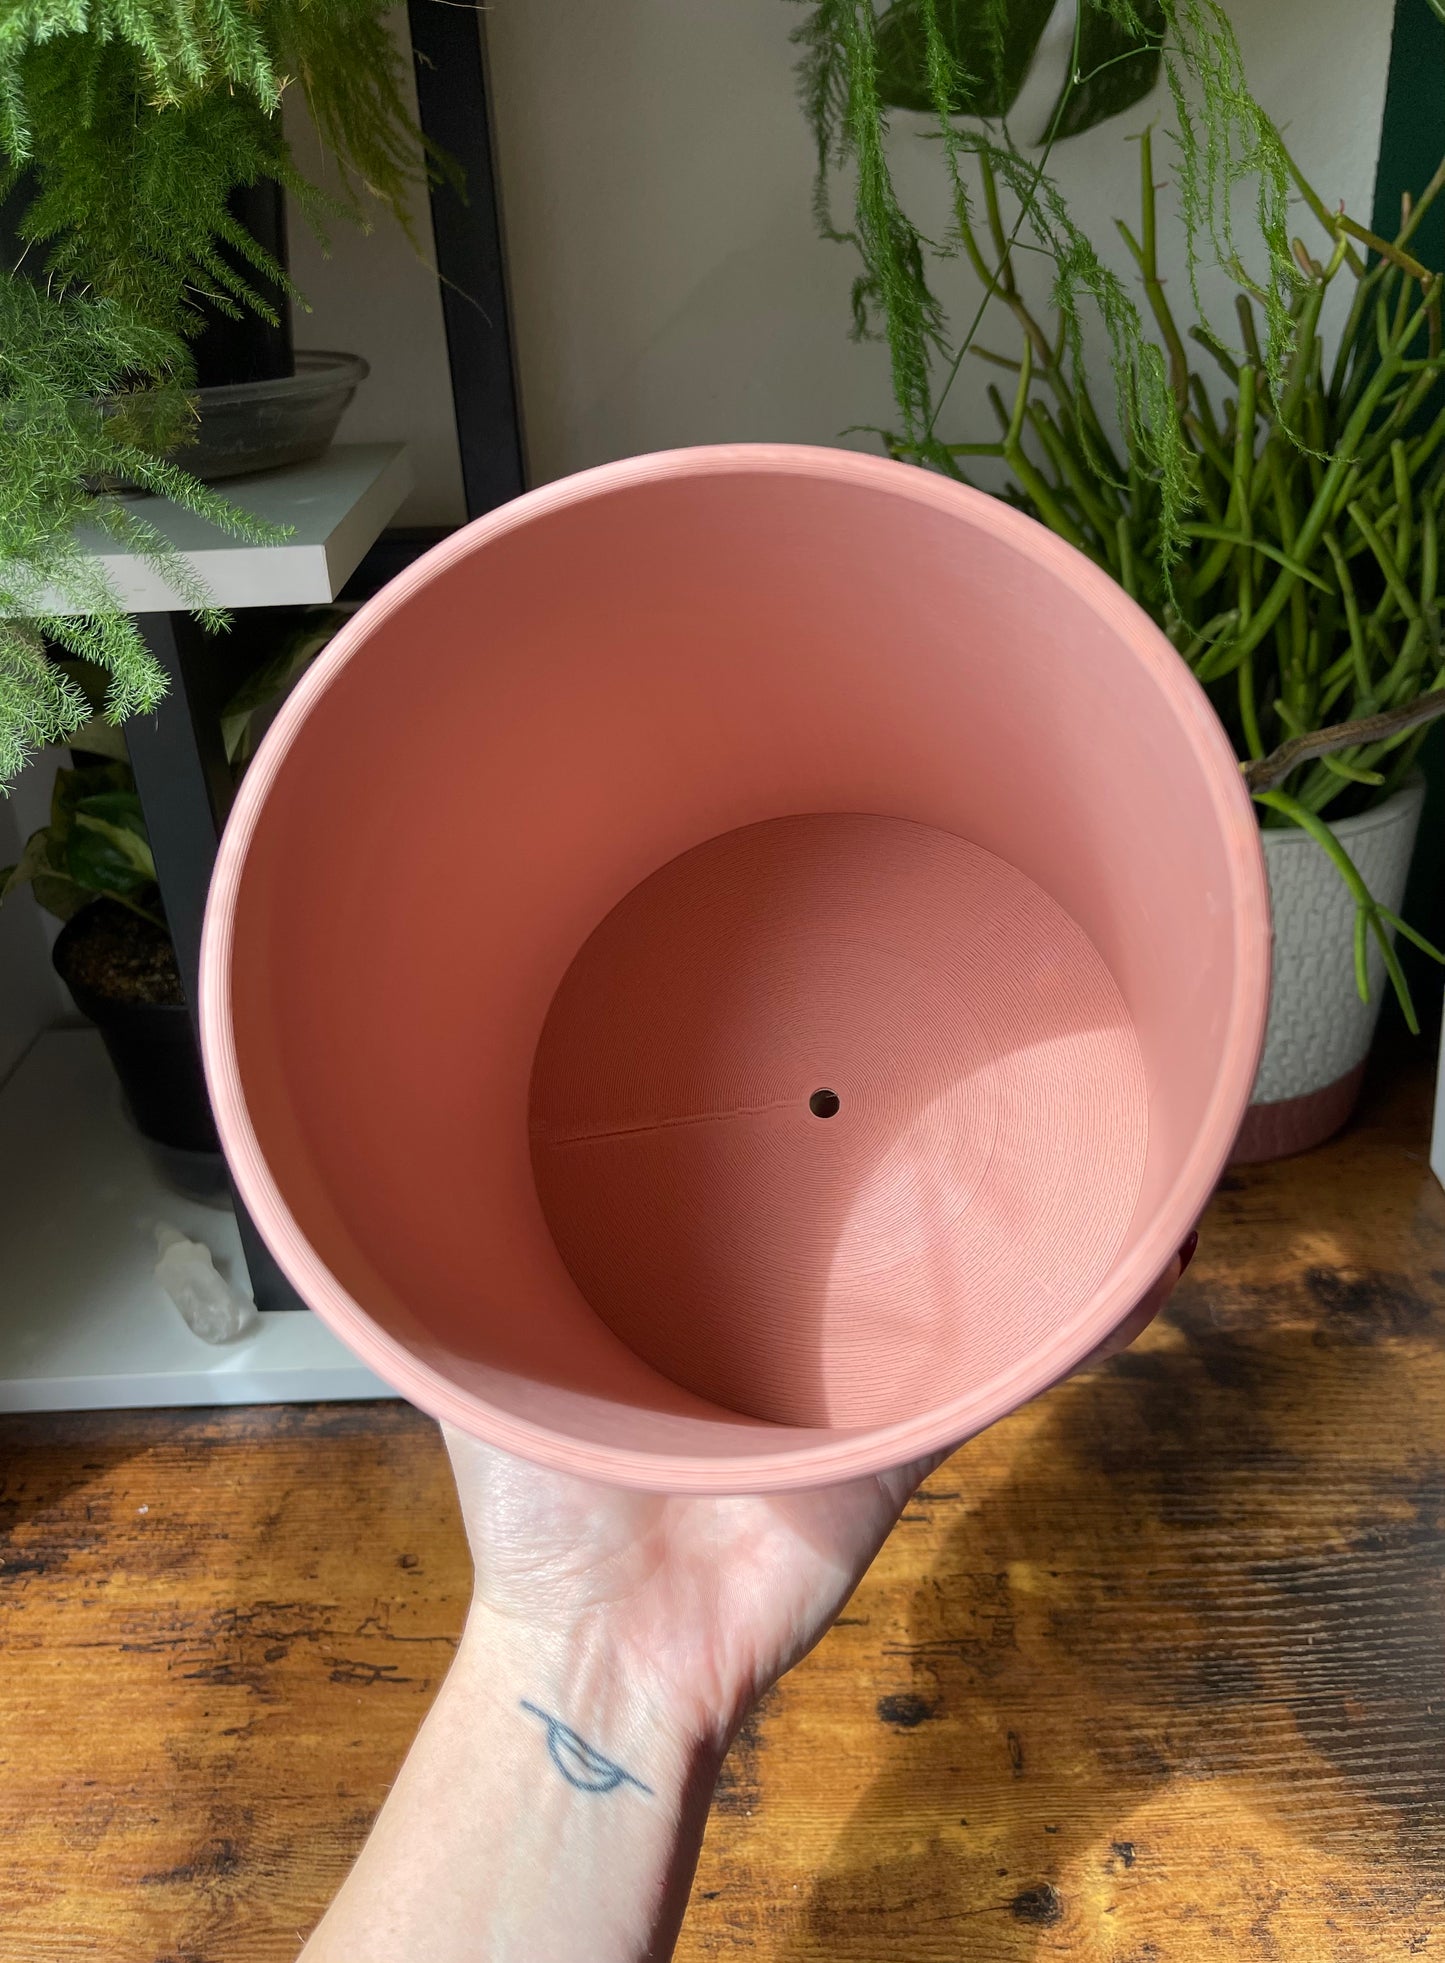 3D Printed Planter from Plant Based Materials